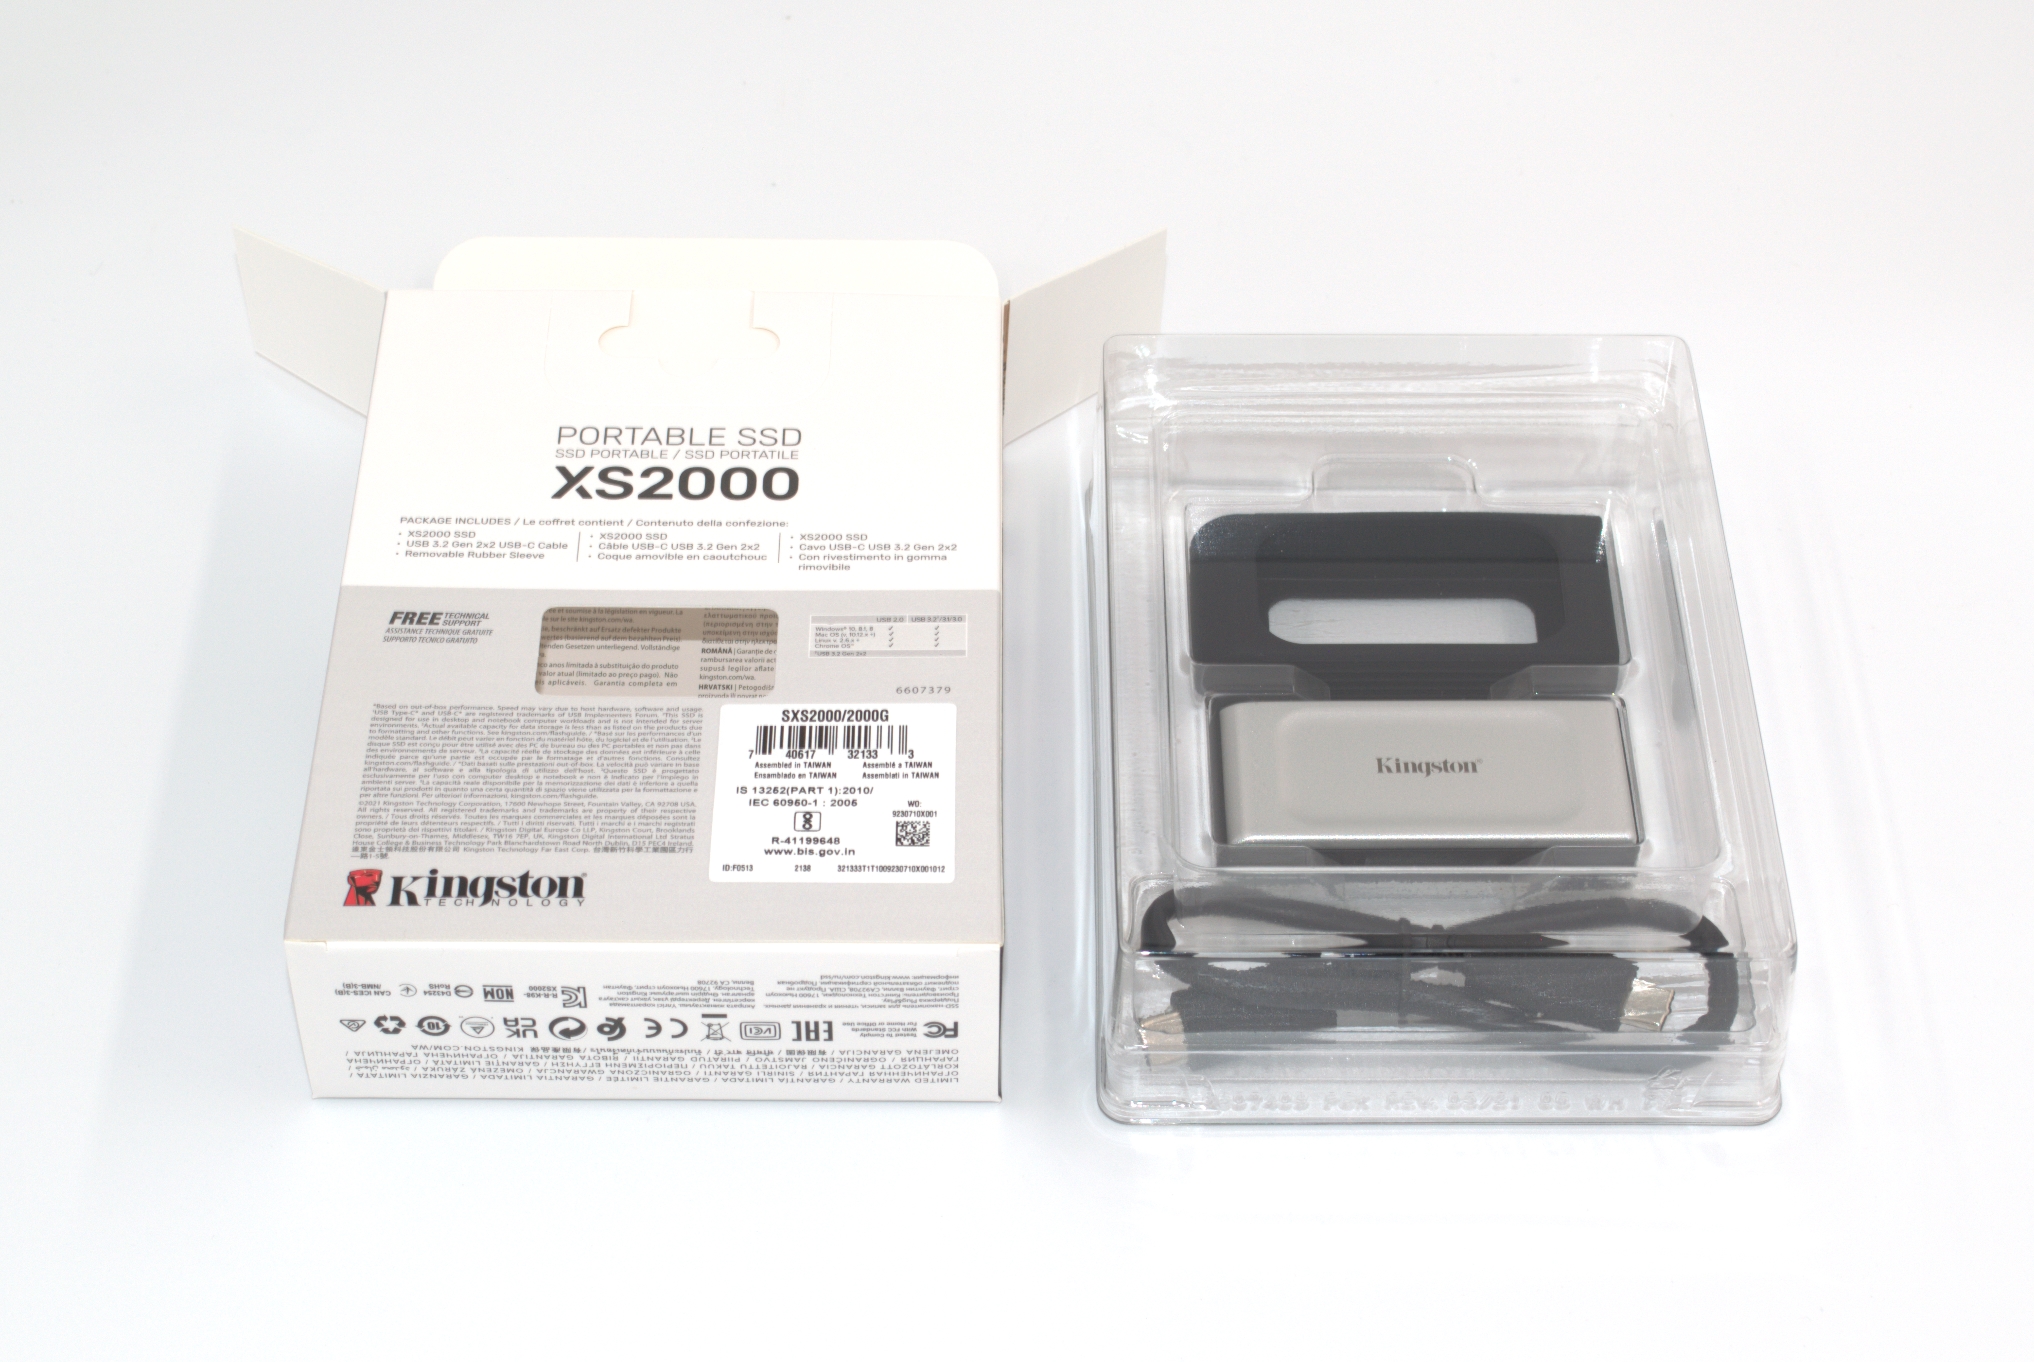 Kingston SSD XS2000 review: portable and fast